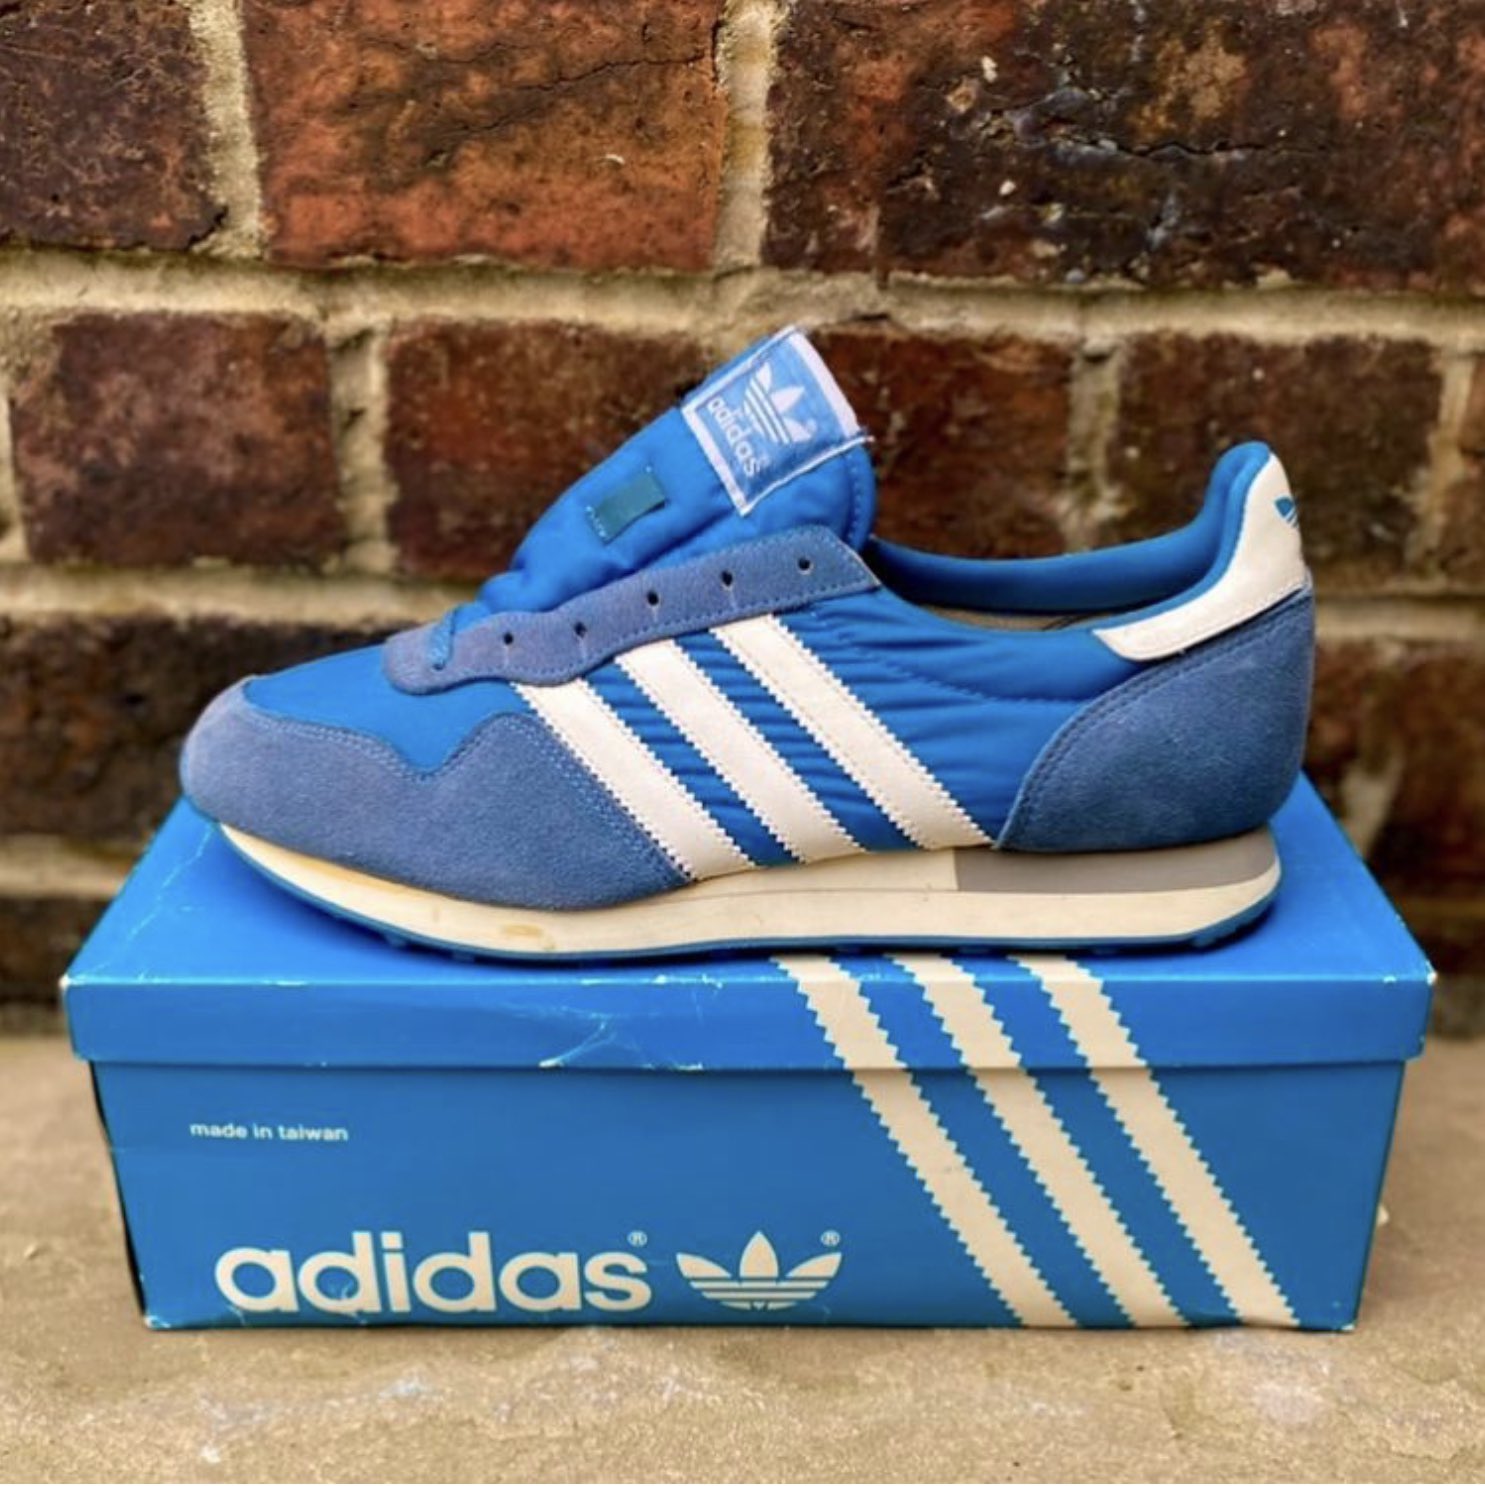 deadstock_utopia on Twitter: "Adidas Gipsy 1985 pic credit instagram #adidas #adidasoriginals #adidasvintage https://t.co/qP89ikZmBf" / Twitter